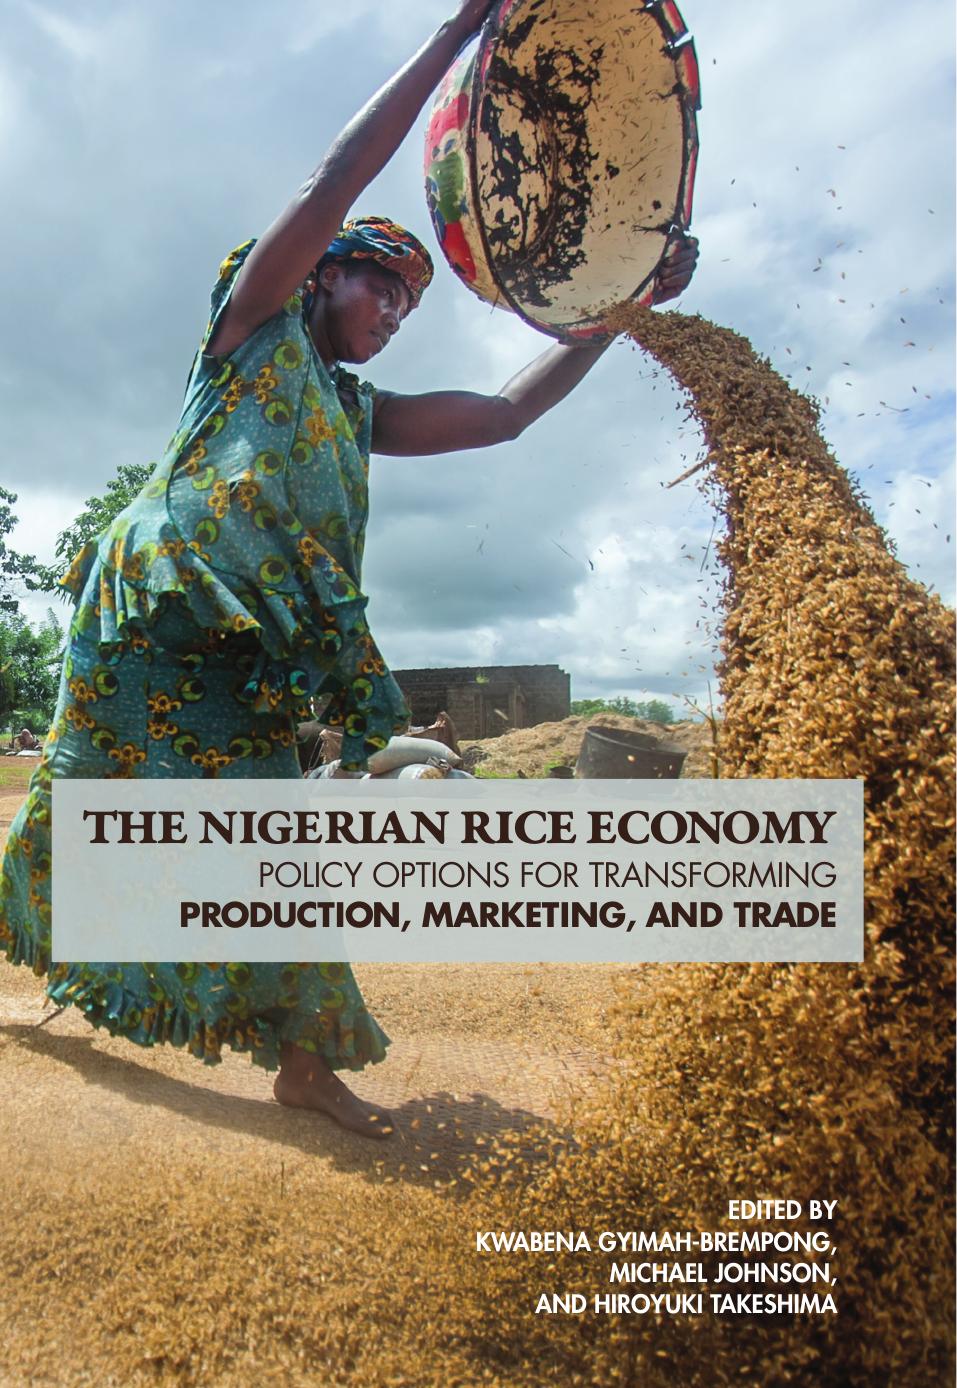 The Nigerian Rice Economy Policy Options for Transforming Production, Marketing, and Trade 2016